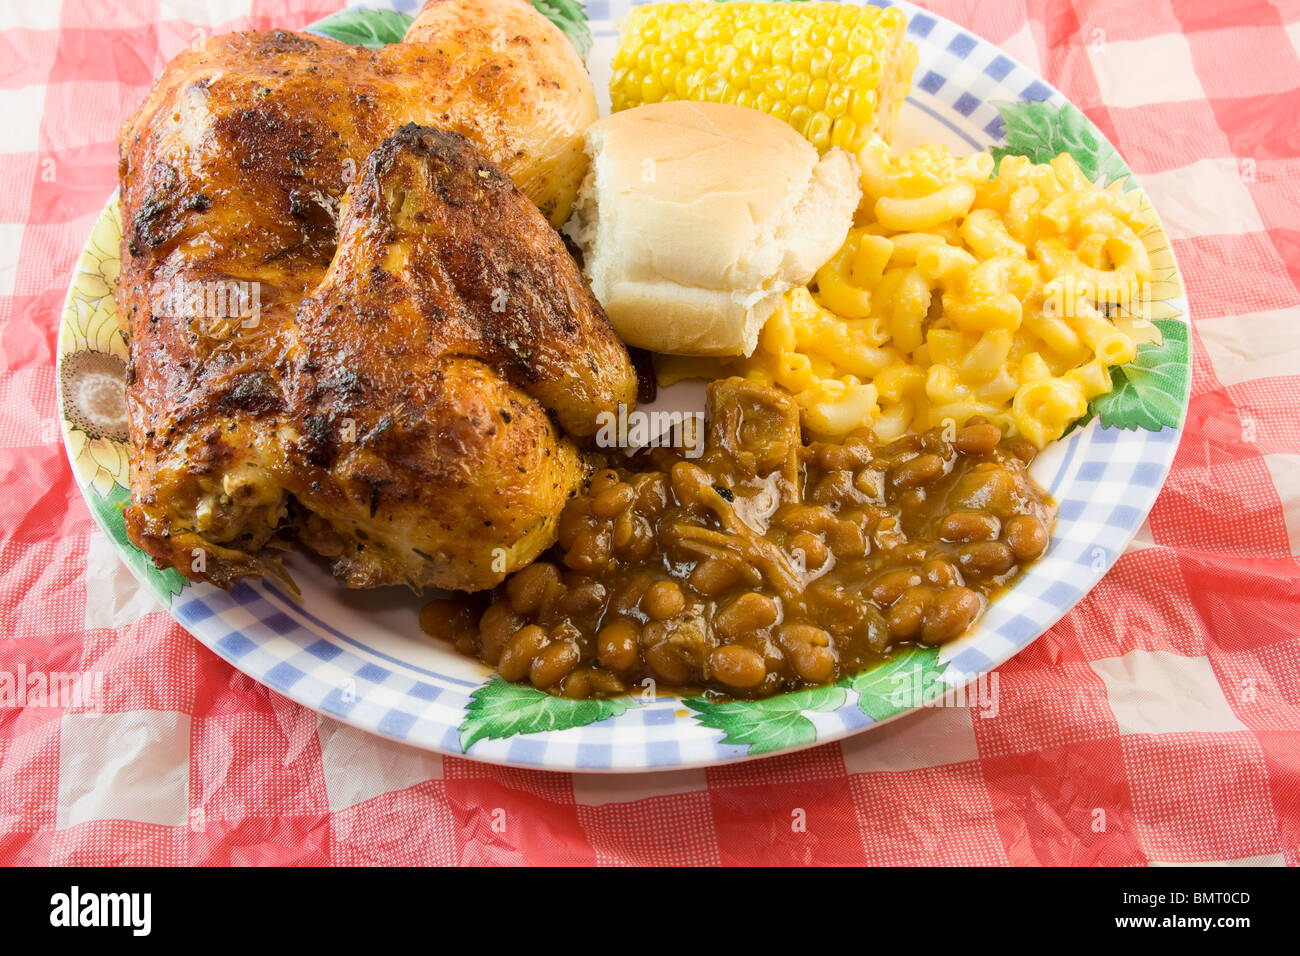 picnic style BBQ chicken plate with half smoked chicken, baked beans, macaroni, roll, corn on the cob Stock Photo